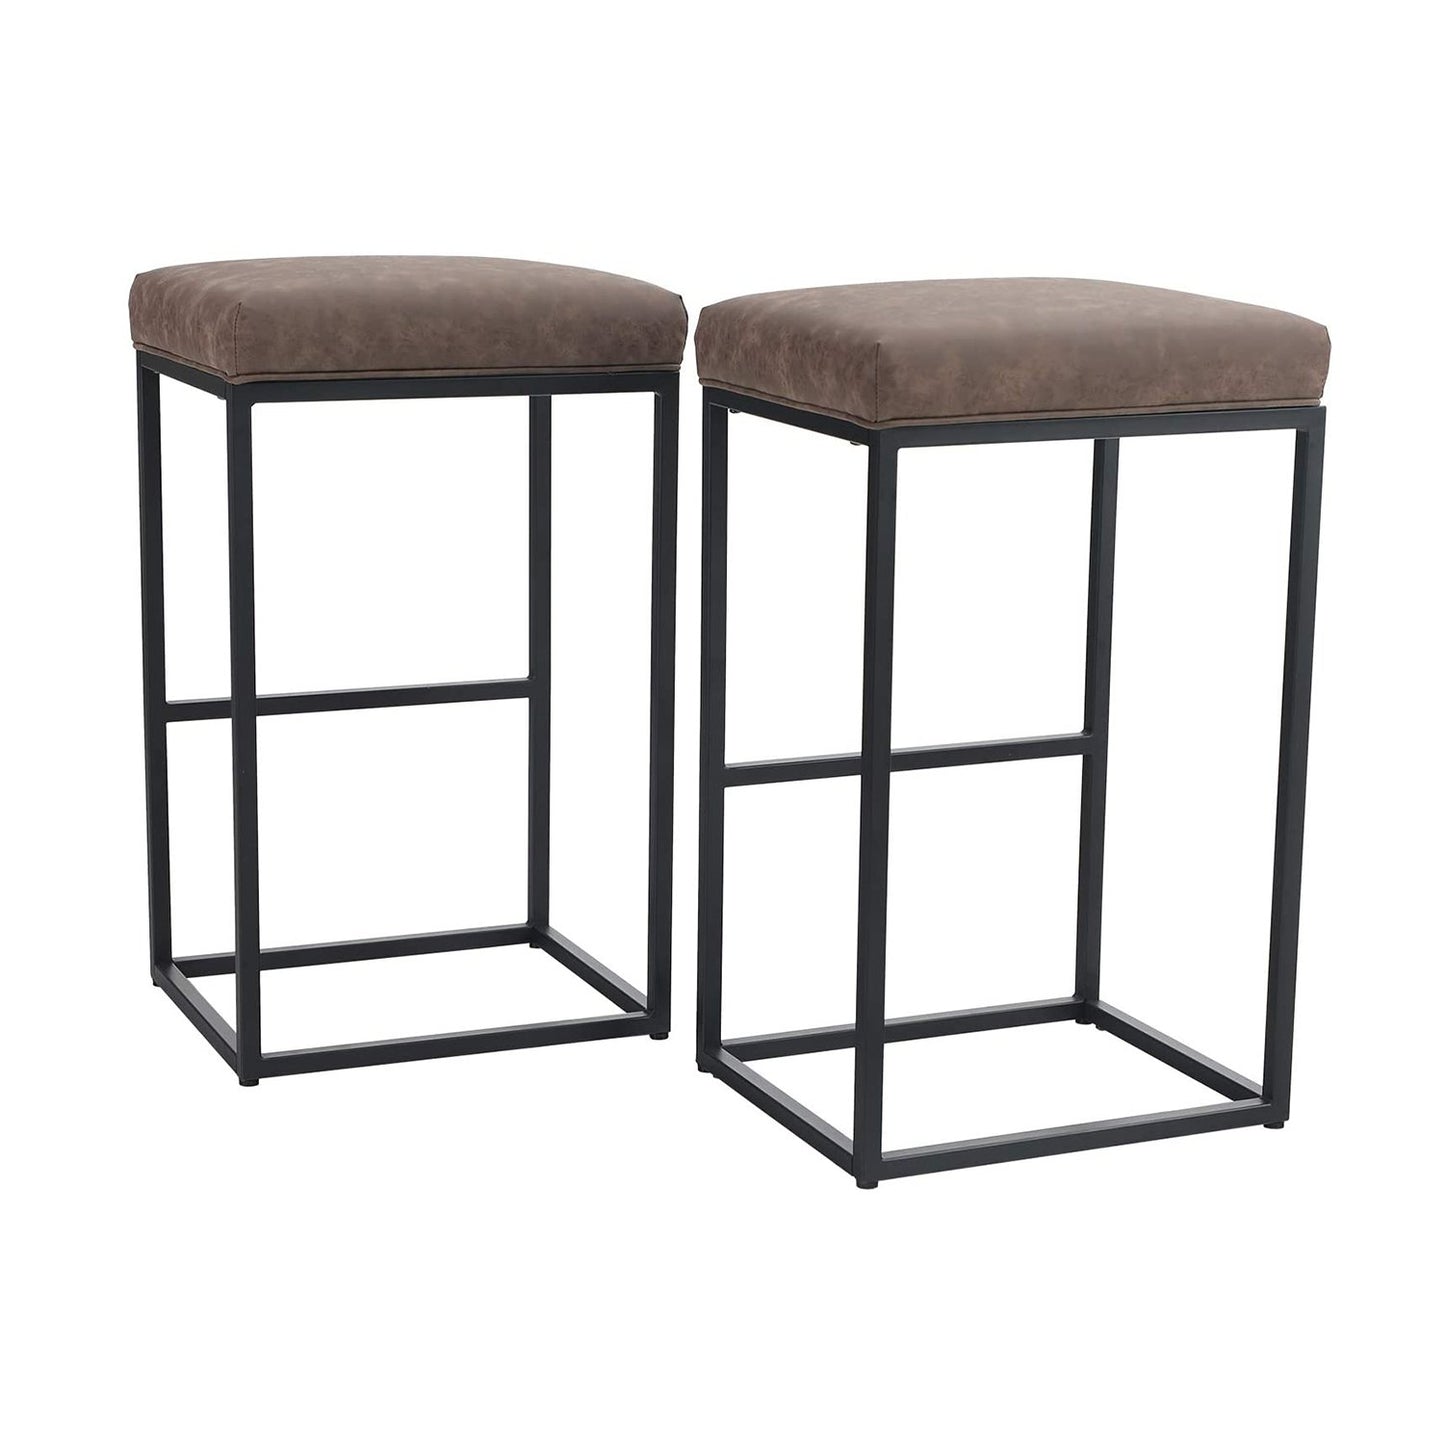 Sophia&William 30" Counter Height Armless Bar Stools Set of 2, Brown